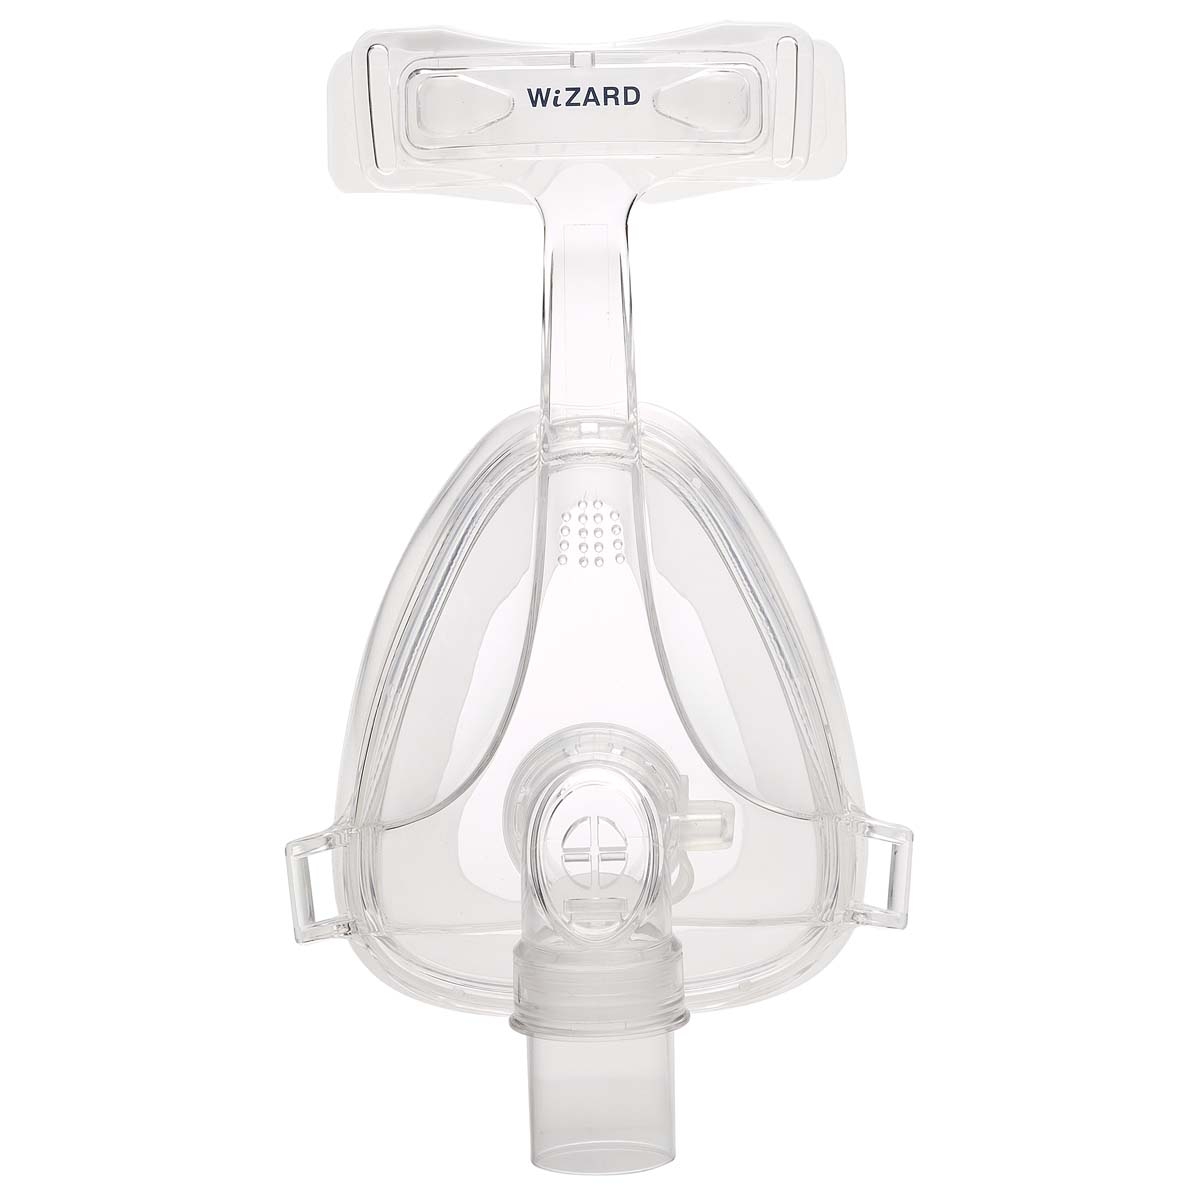 Sunset CPAP Full-Face Mask : # CM005S Sunset Deluxe Full Face CPAP Mask with removable cushion and Headgear , Small-/catalog/full_face_mask/kego/wizard-02